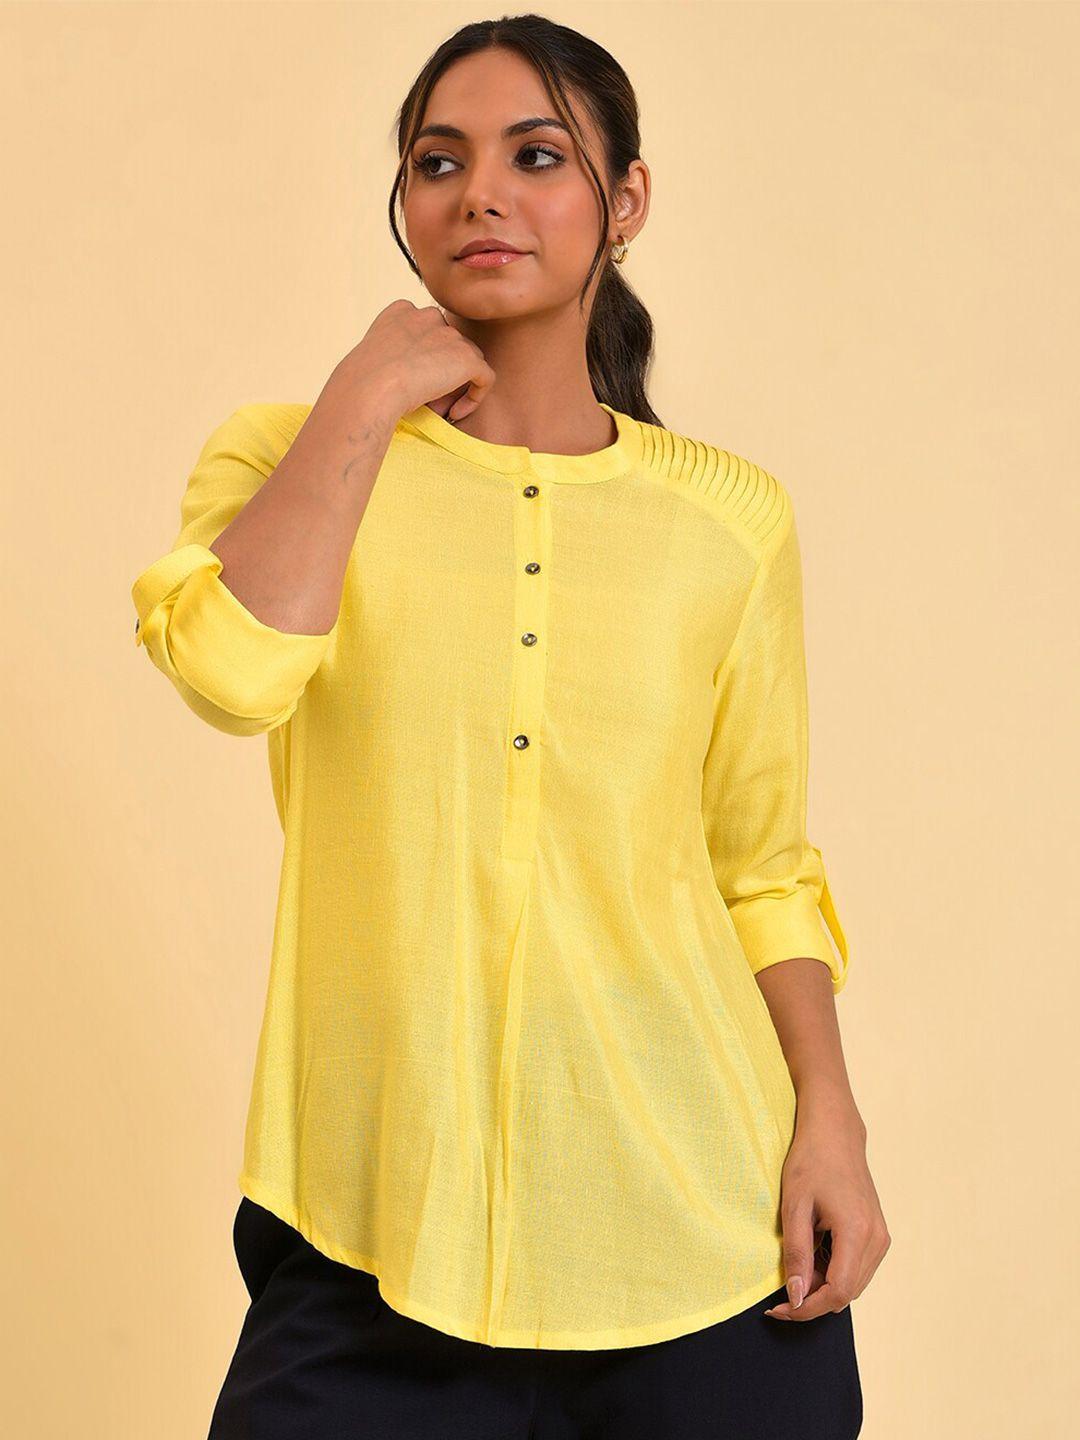 w yellow roll-up sleeves shirt style top